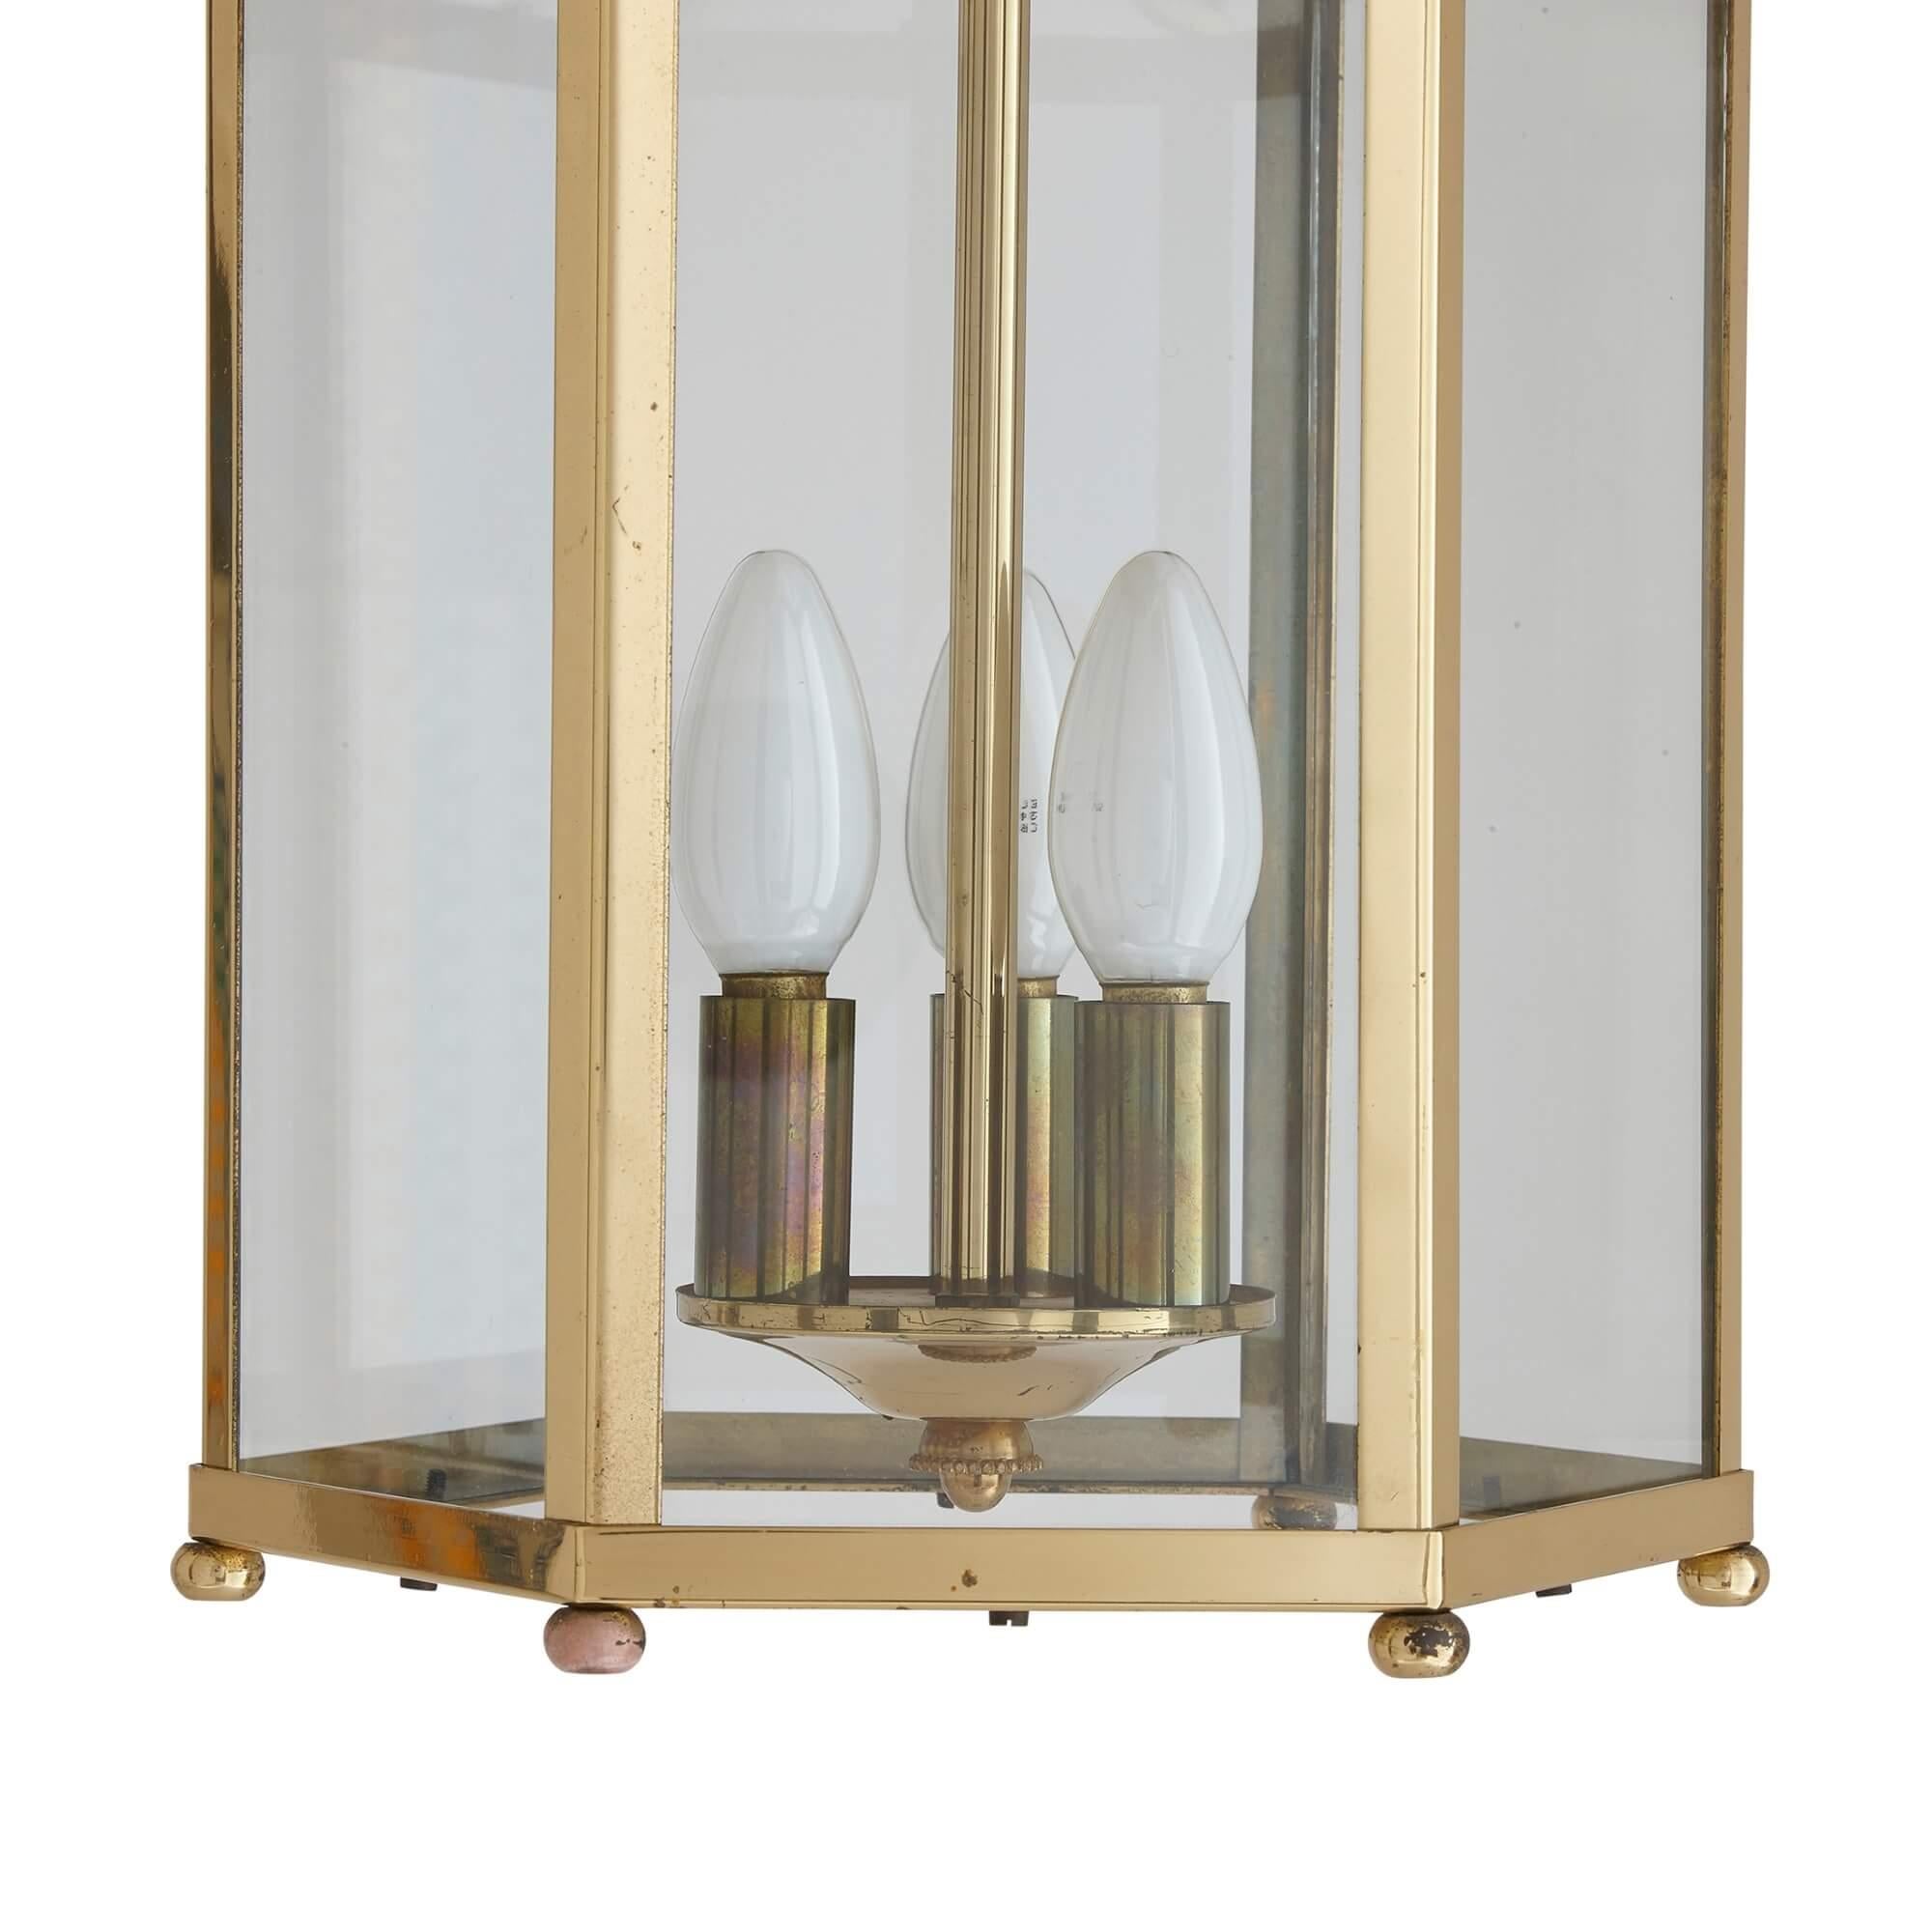 20th Century French Neoclassical Style Brass Lantern For Sale